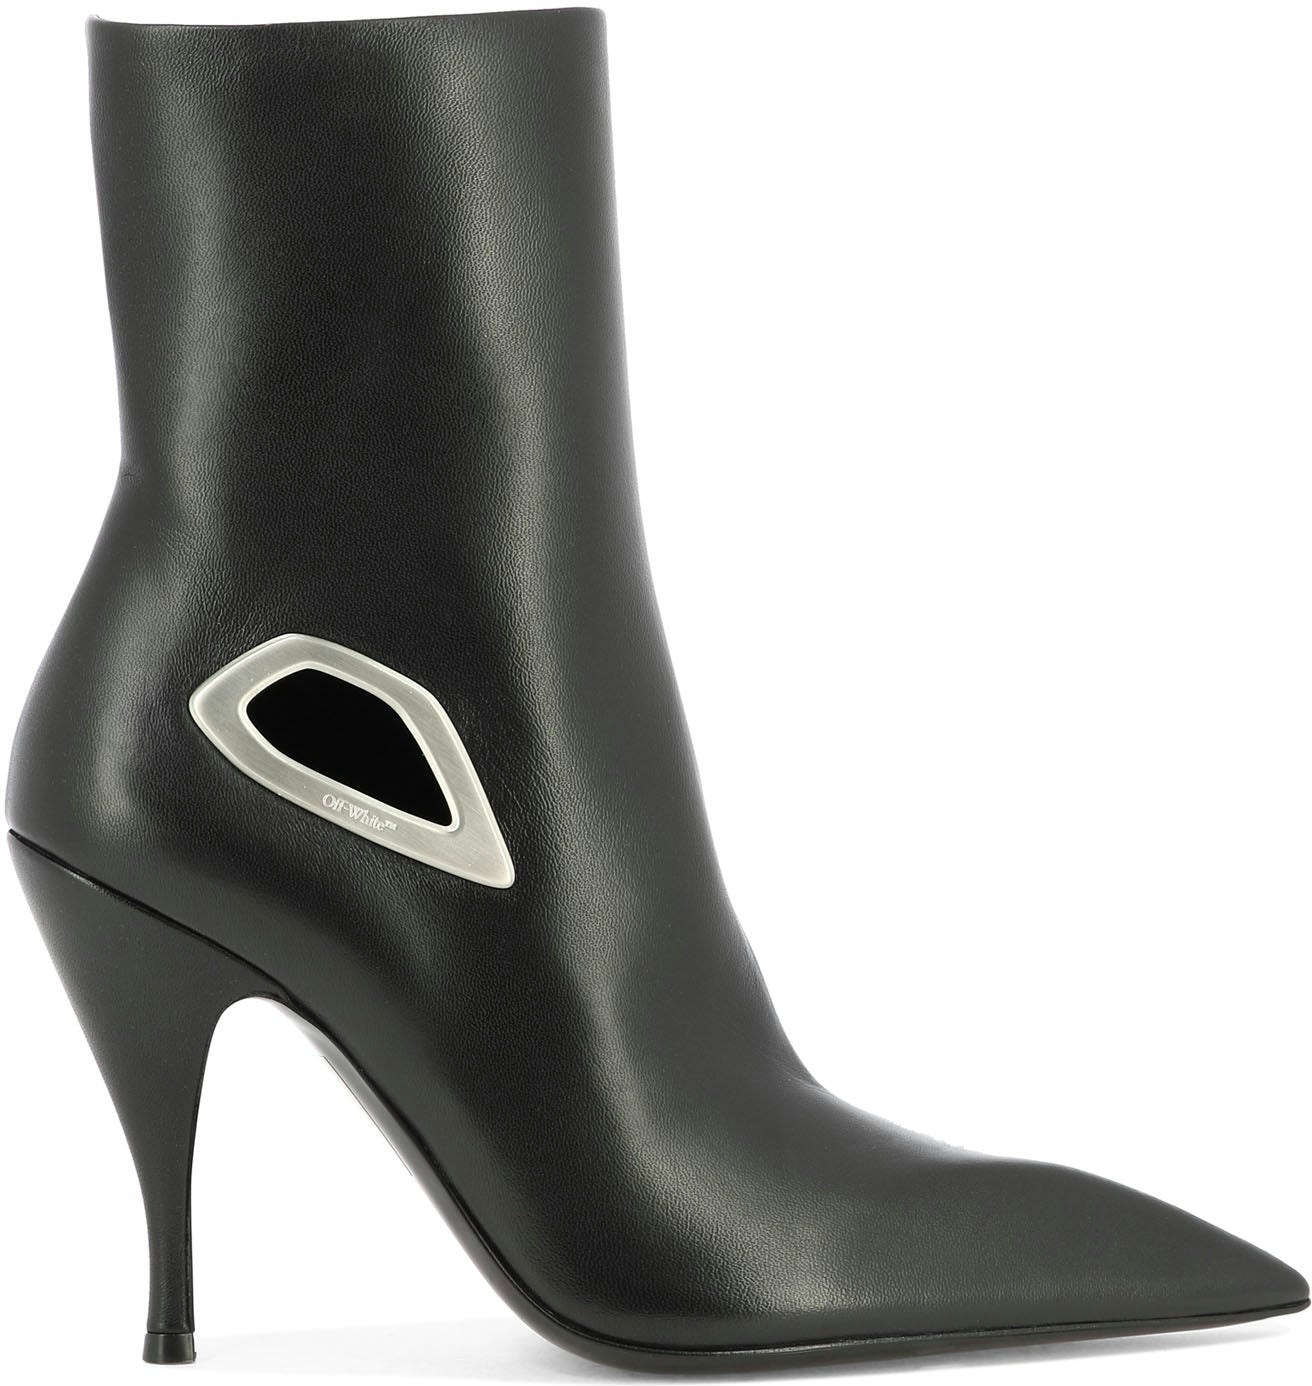 Illusion Ankle Boot - Women - Shoes